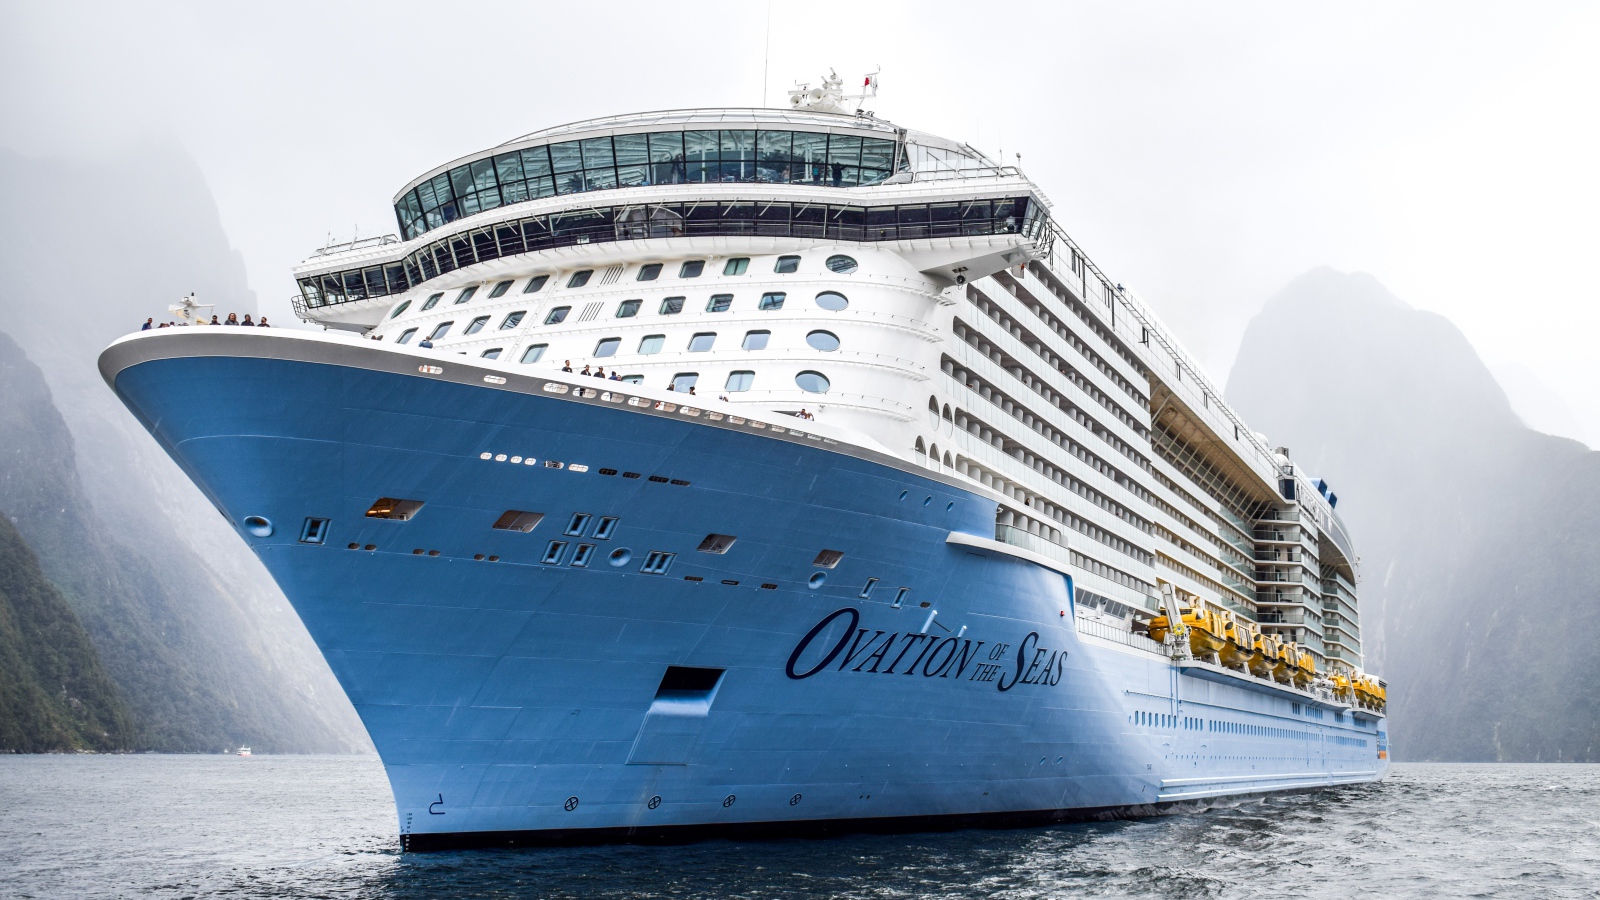 Large cruise ship Ovation of the Seas sails into the fjord